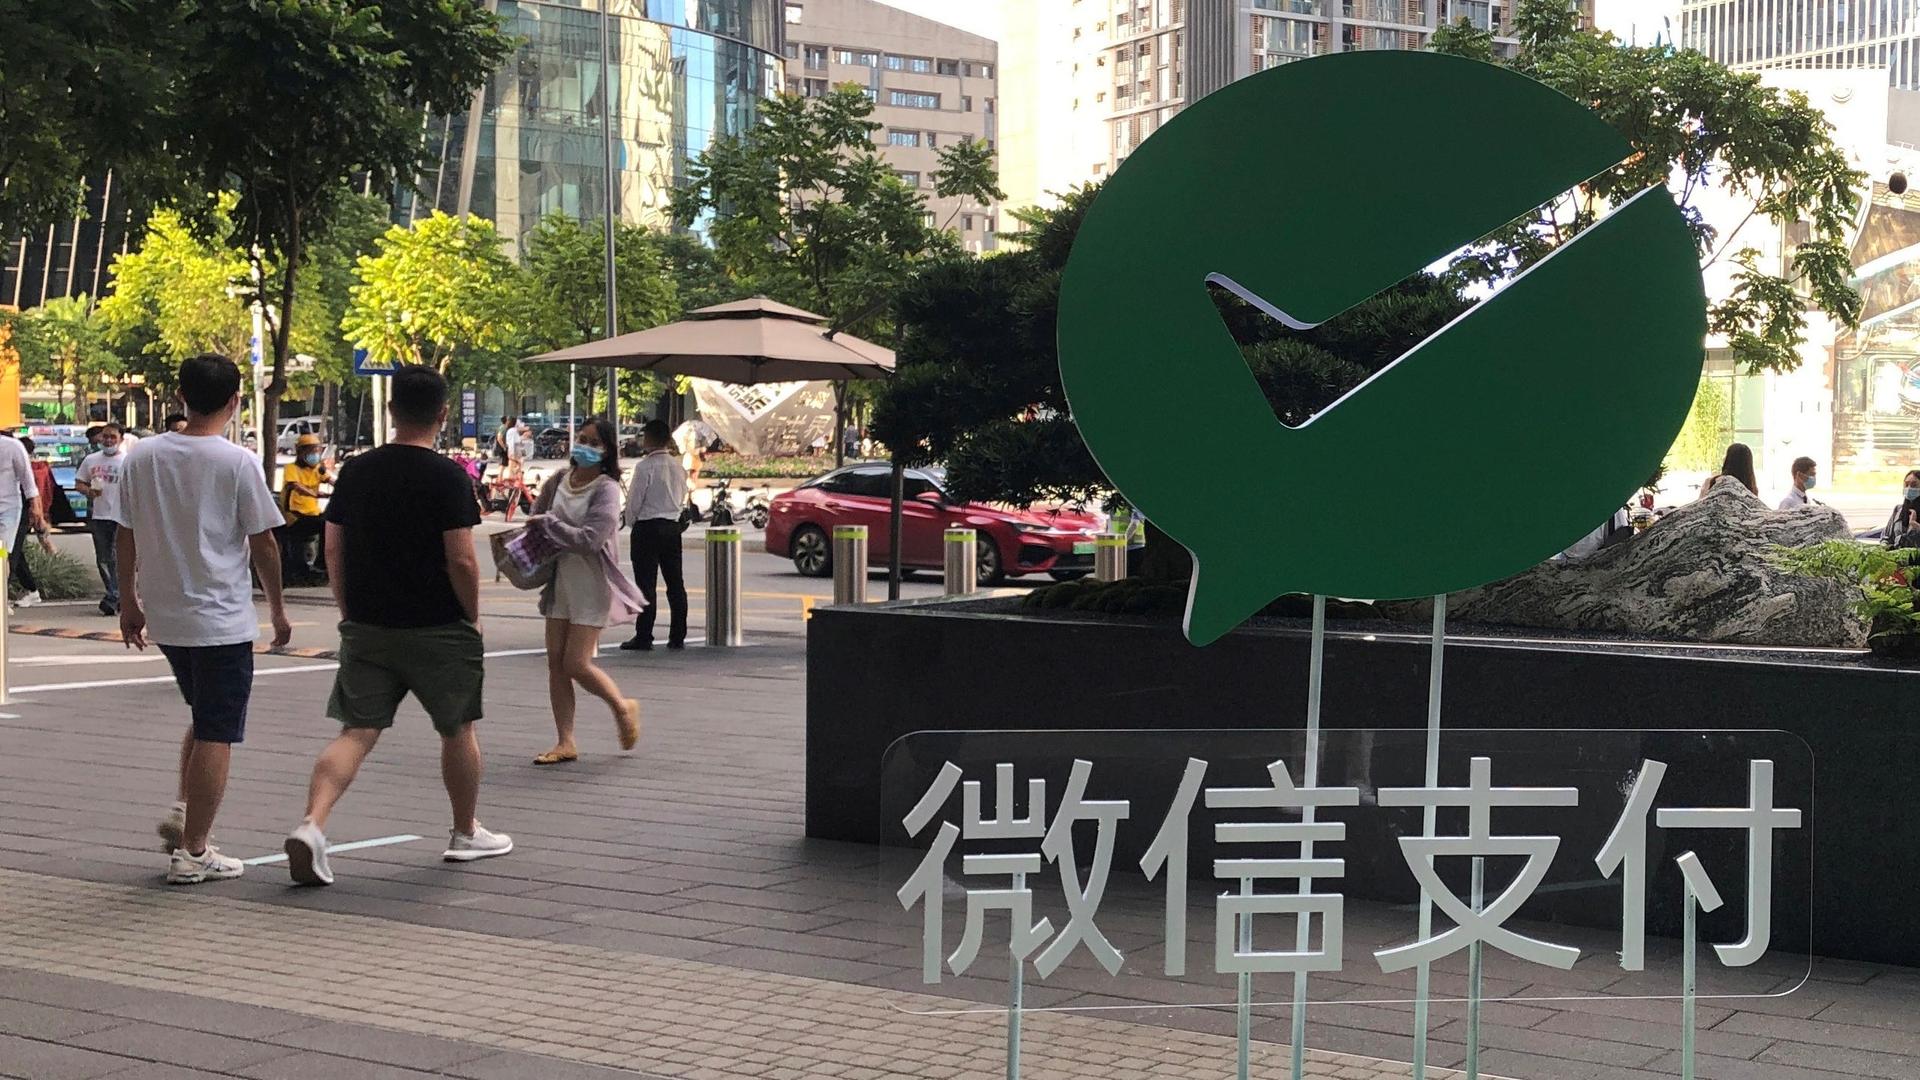 People walk past a Wechat Pay sign at the Tencent company headquarters in Shenzhen, Guangdong province, China, Aug. 7, 2020.